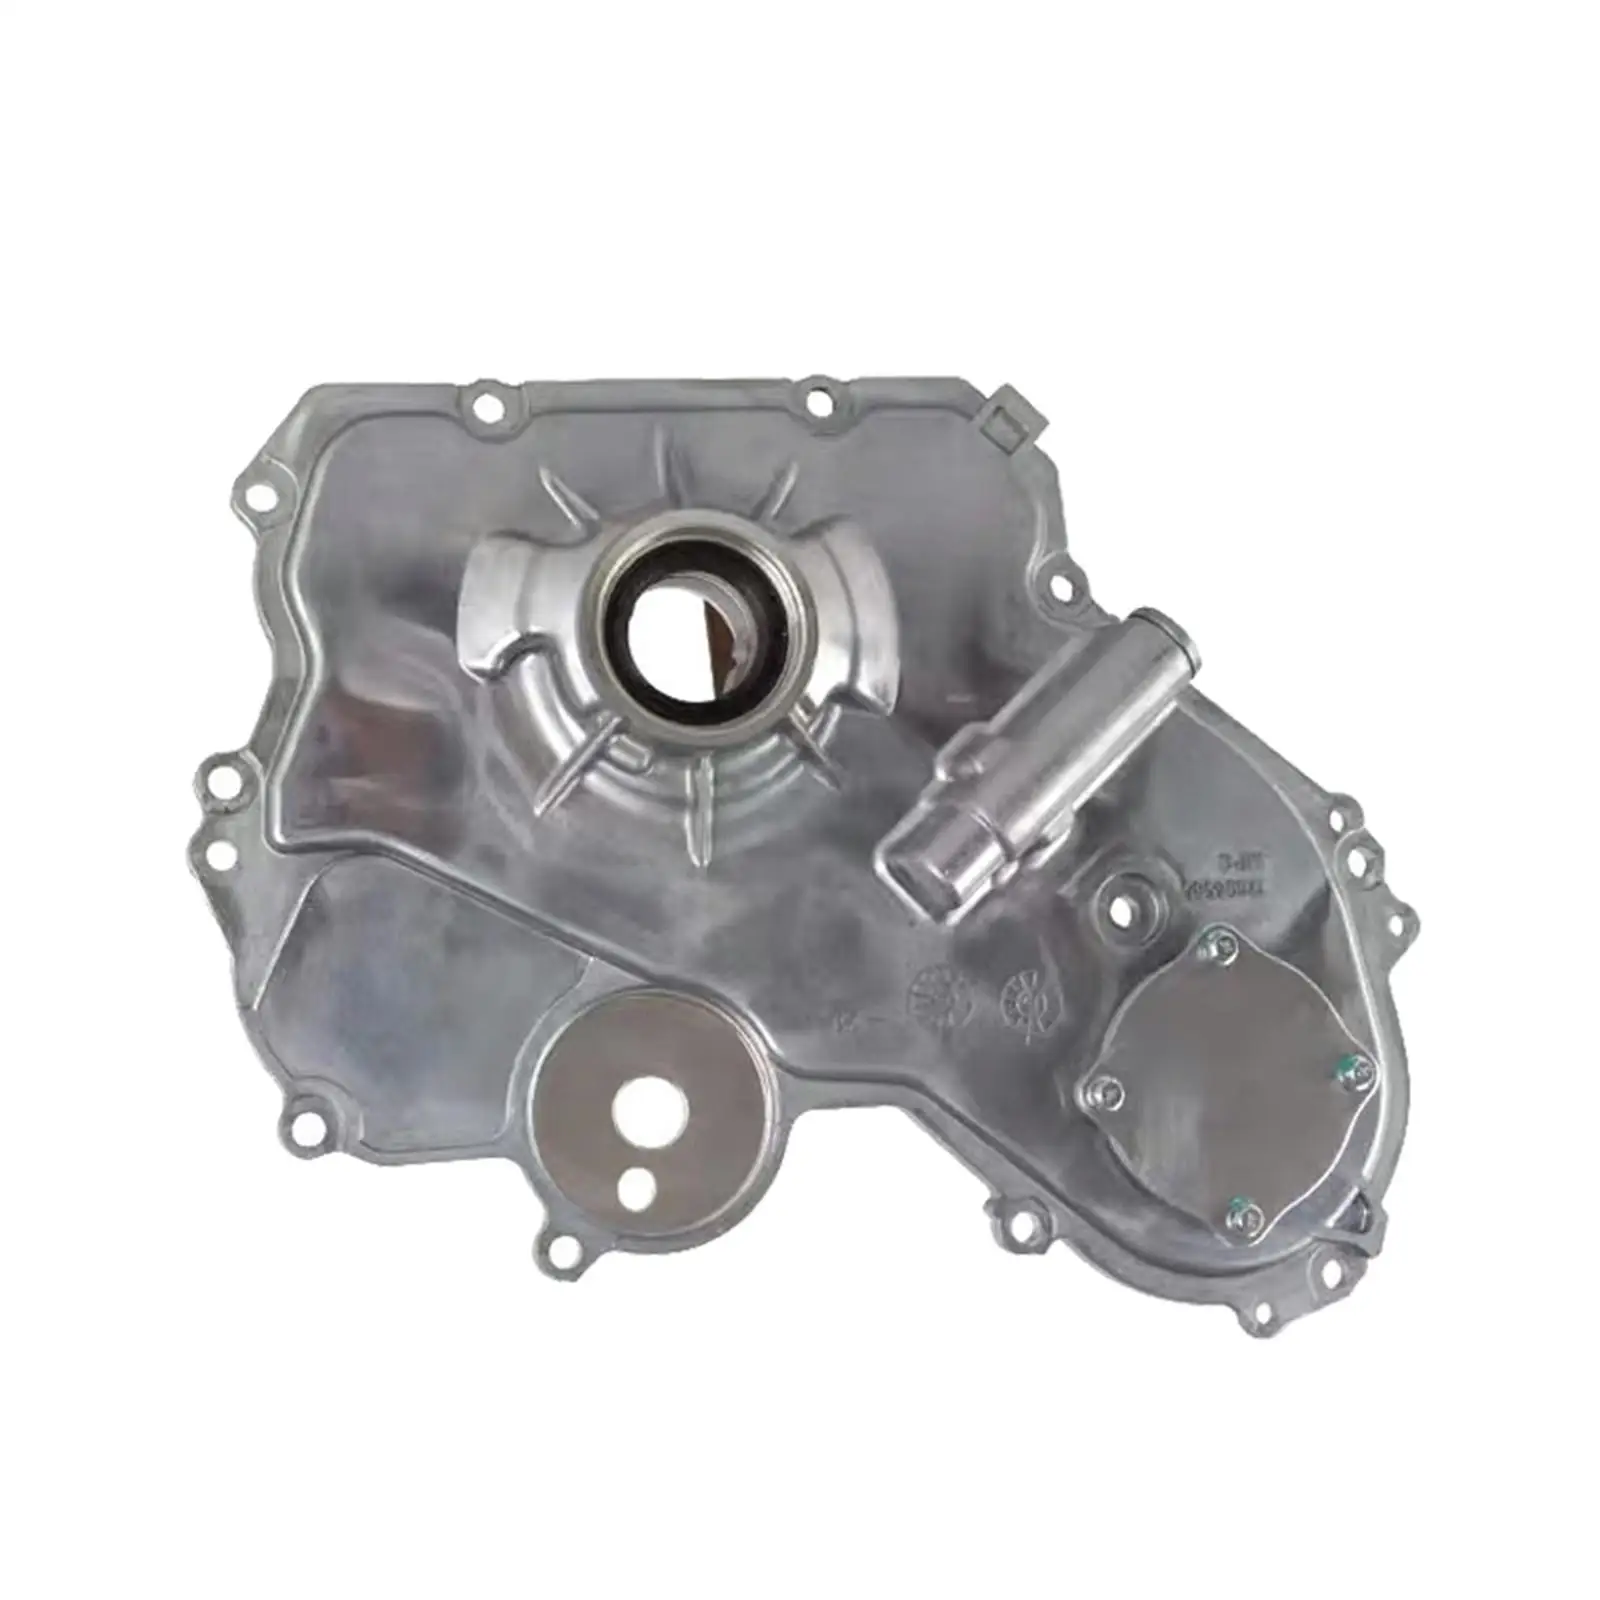 Timing Cover Oil Pump Replaces Parts 12584621 Replacement for Saturn Aura Ion L100 L200 L300 Durable Easy Installation